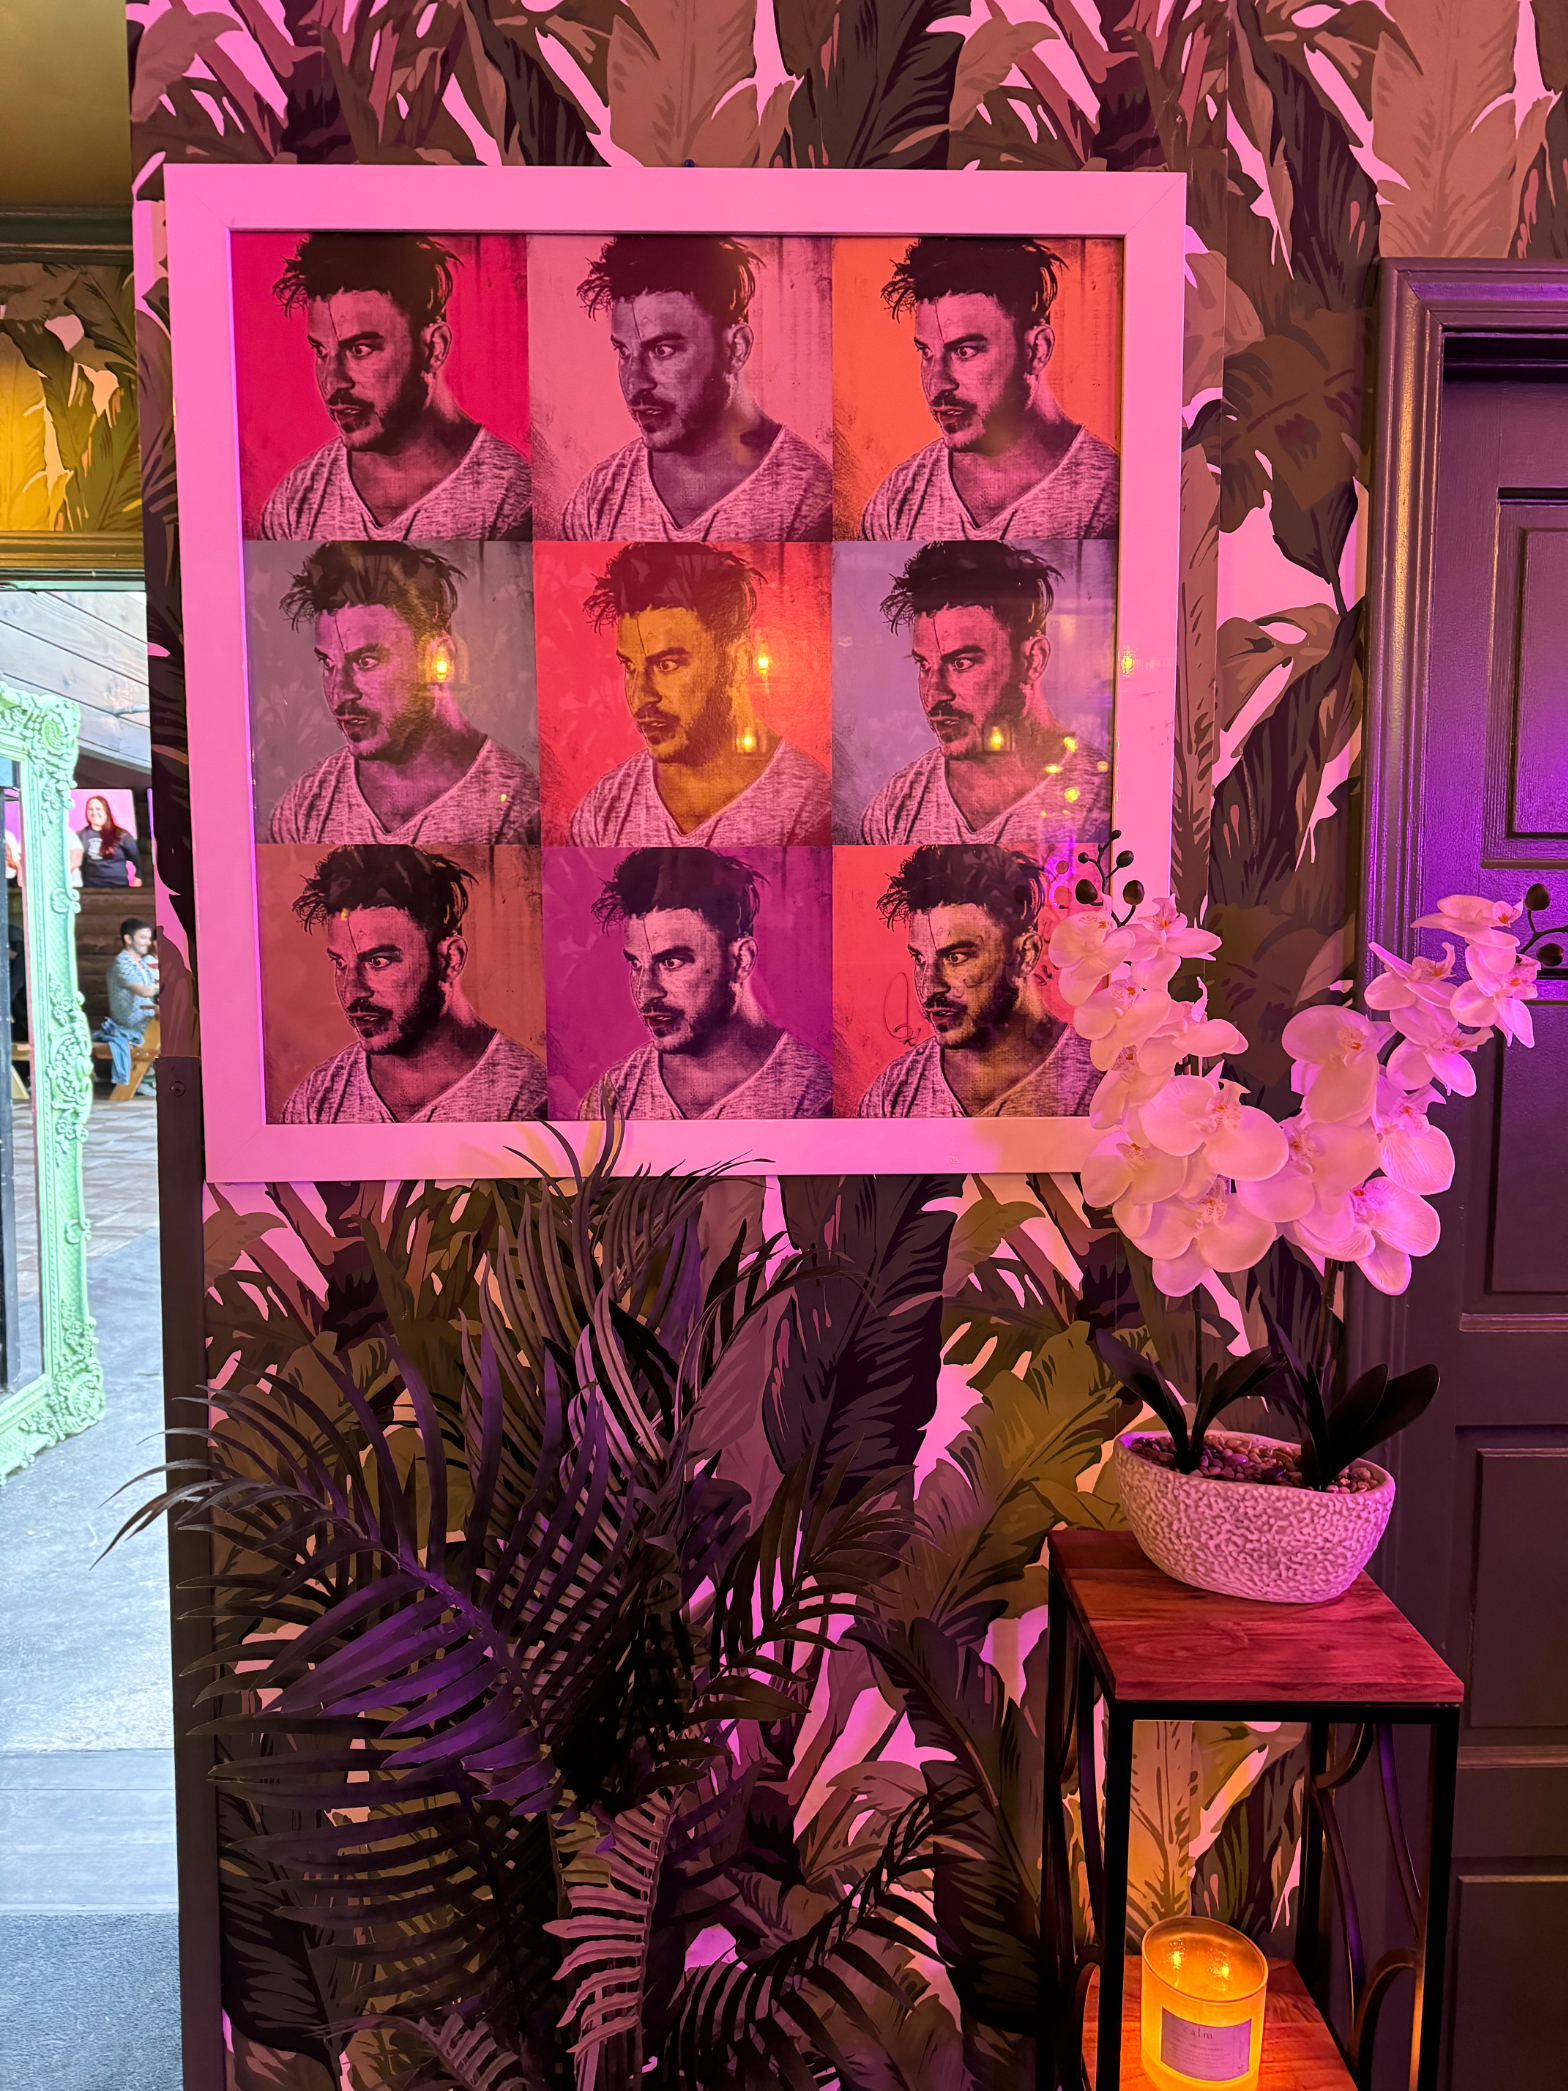 Artwork with repeated portraits above a plant and table with a candle and orchids, in a restaurant setting